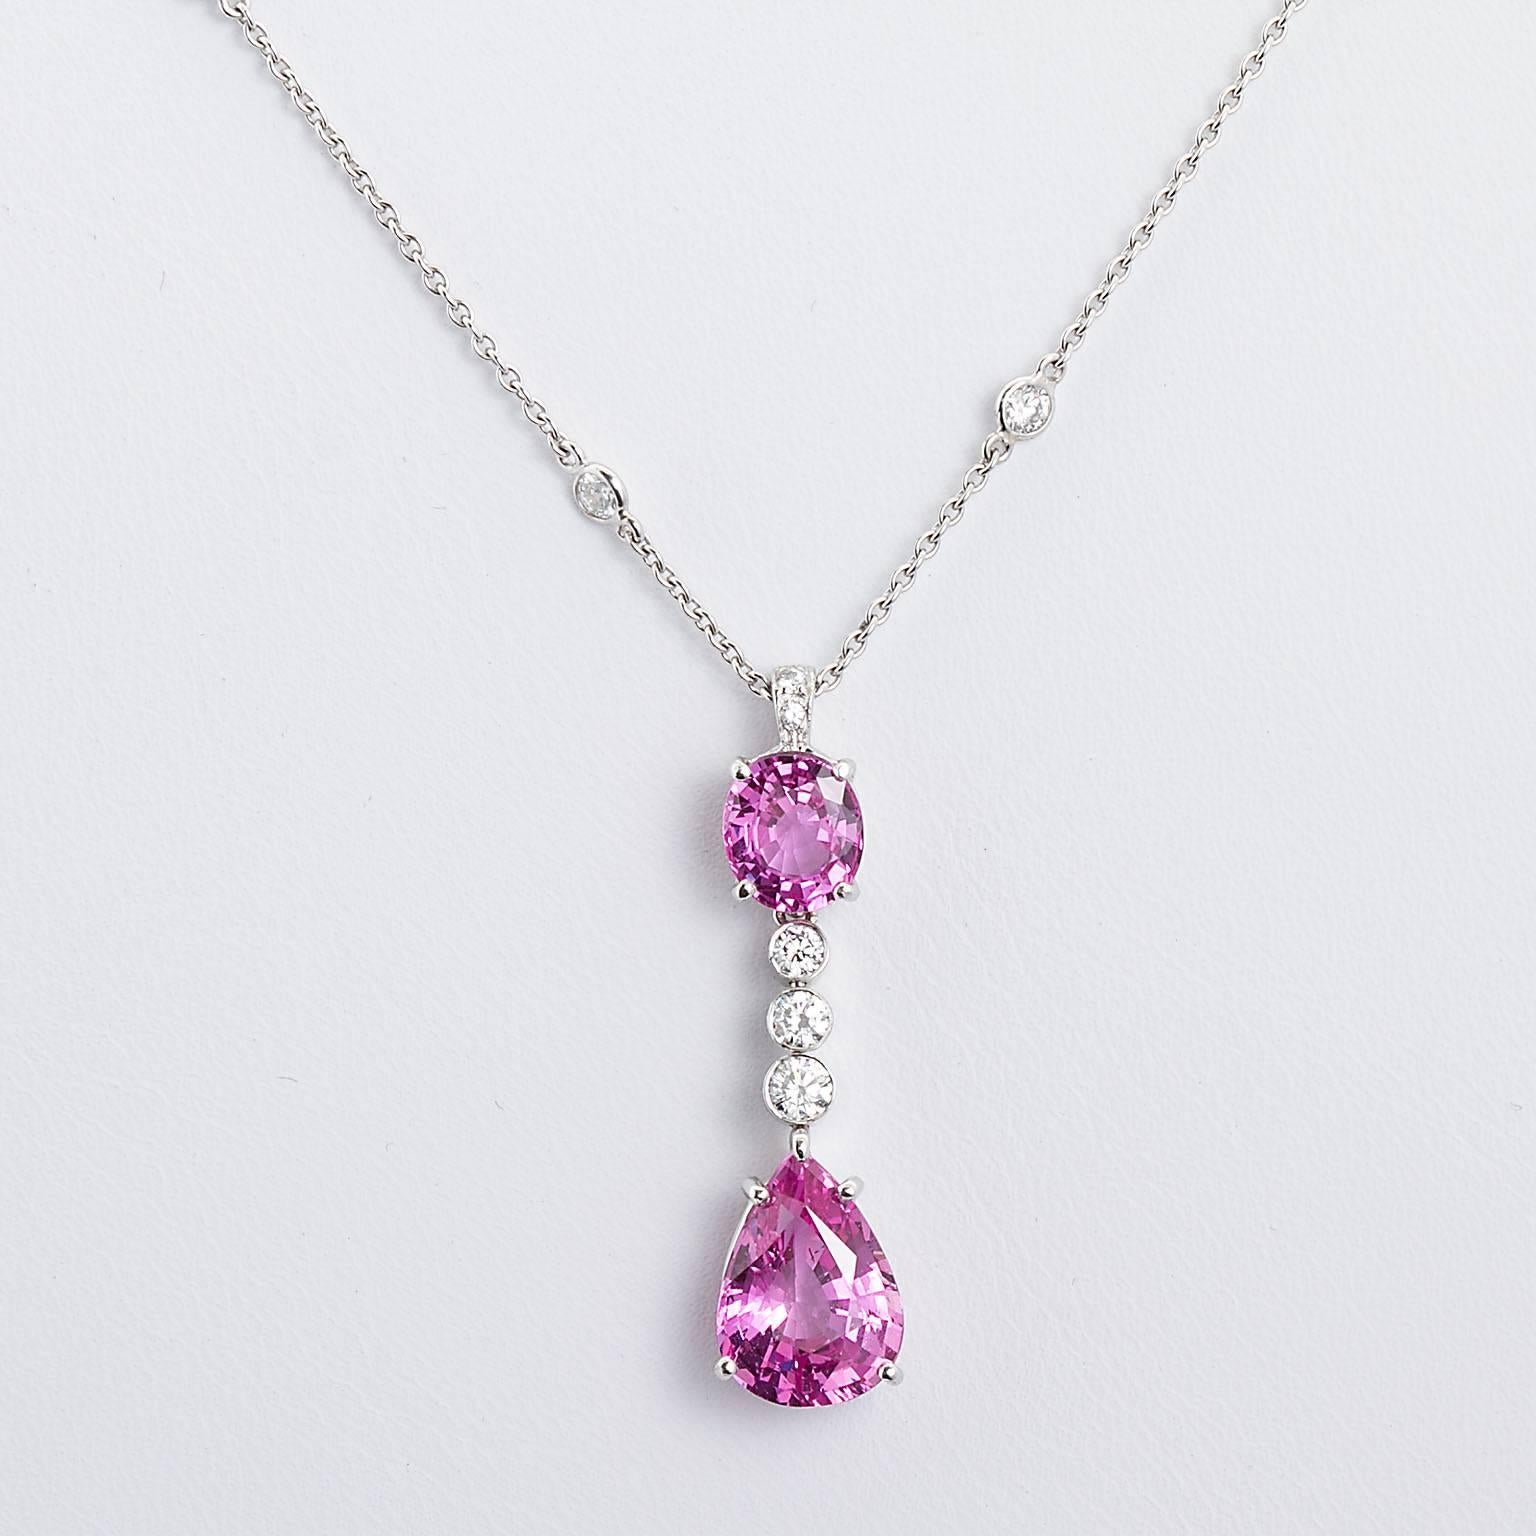 Belle en rose. A fine pink sapphire and diamond pendant in platinum with diamond by yard necklace. Set with a 3.66 ct. pear shape purplish pink sapphire, a 1.59 ct. purple pink sapphire, and 1.10 ctw of round brilliant diamonds.
Pendant is approx.